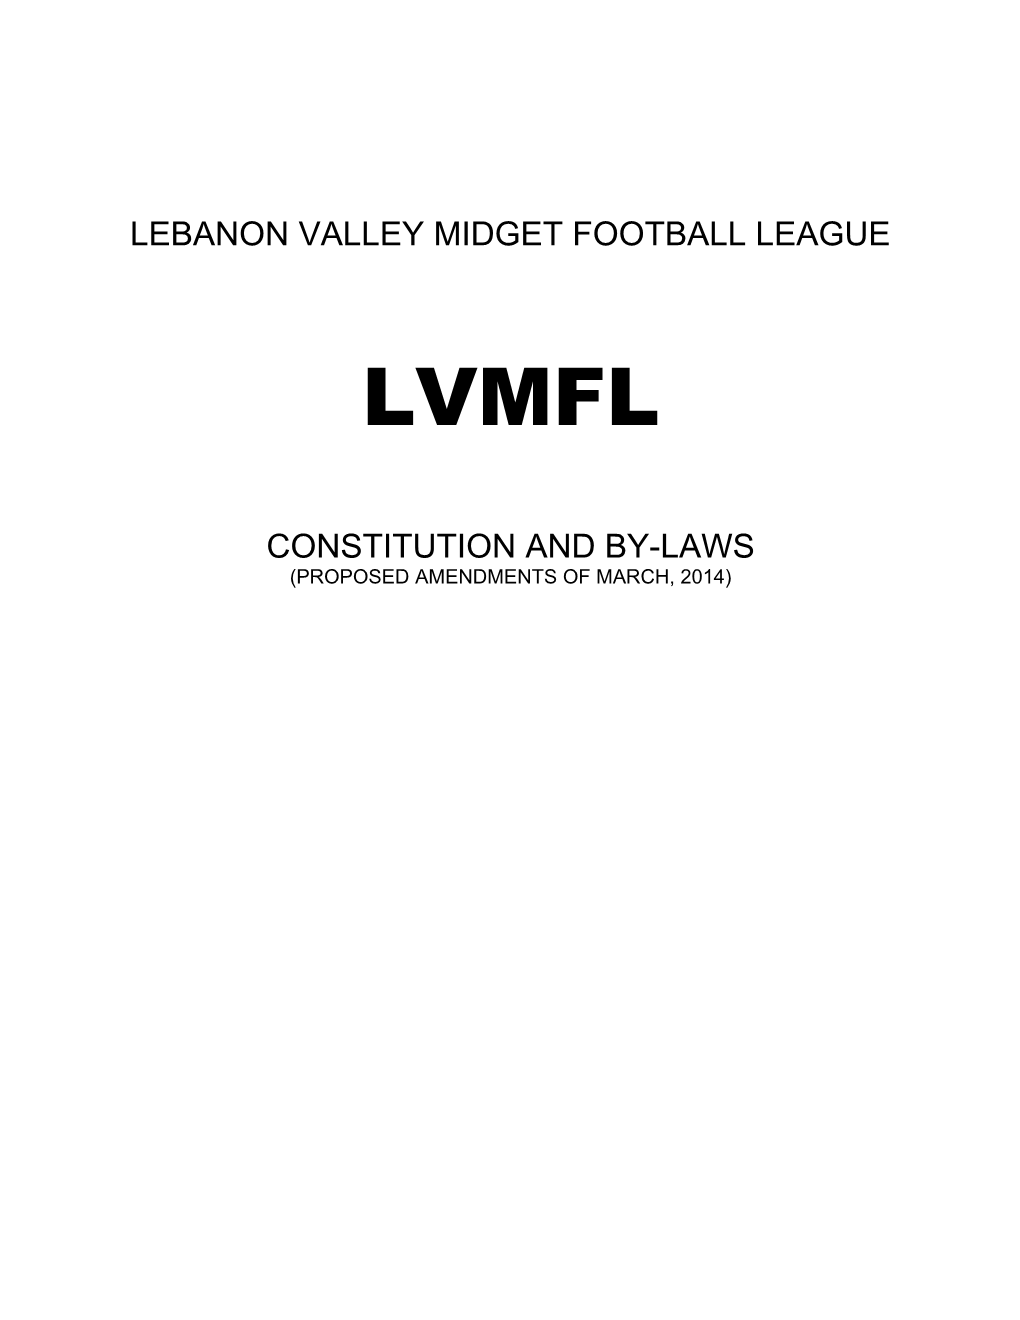 Lebanon Valley Midget Football League Constitution and By-Laws